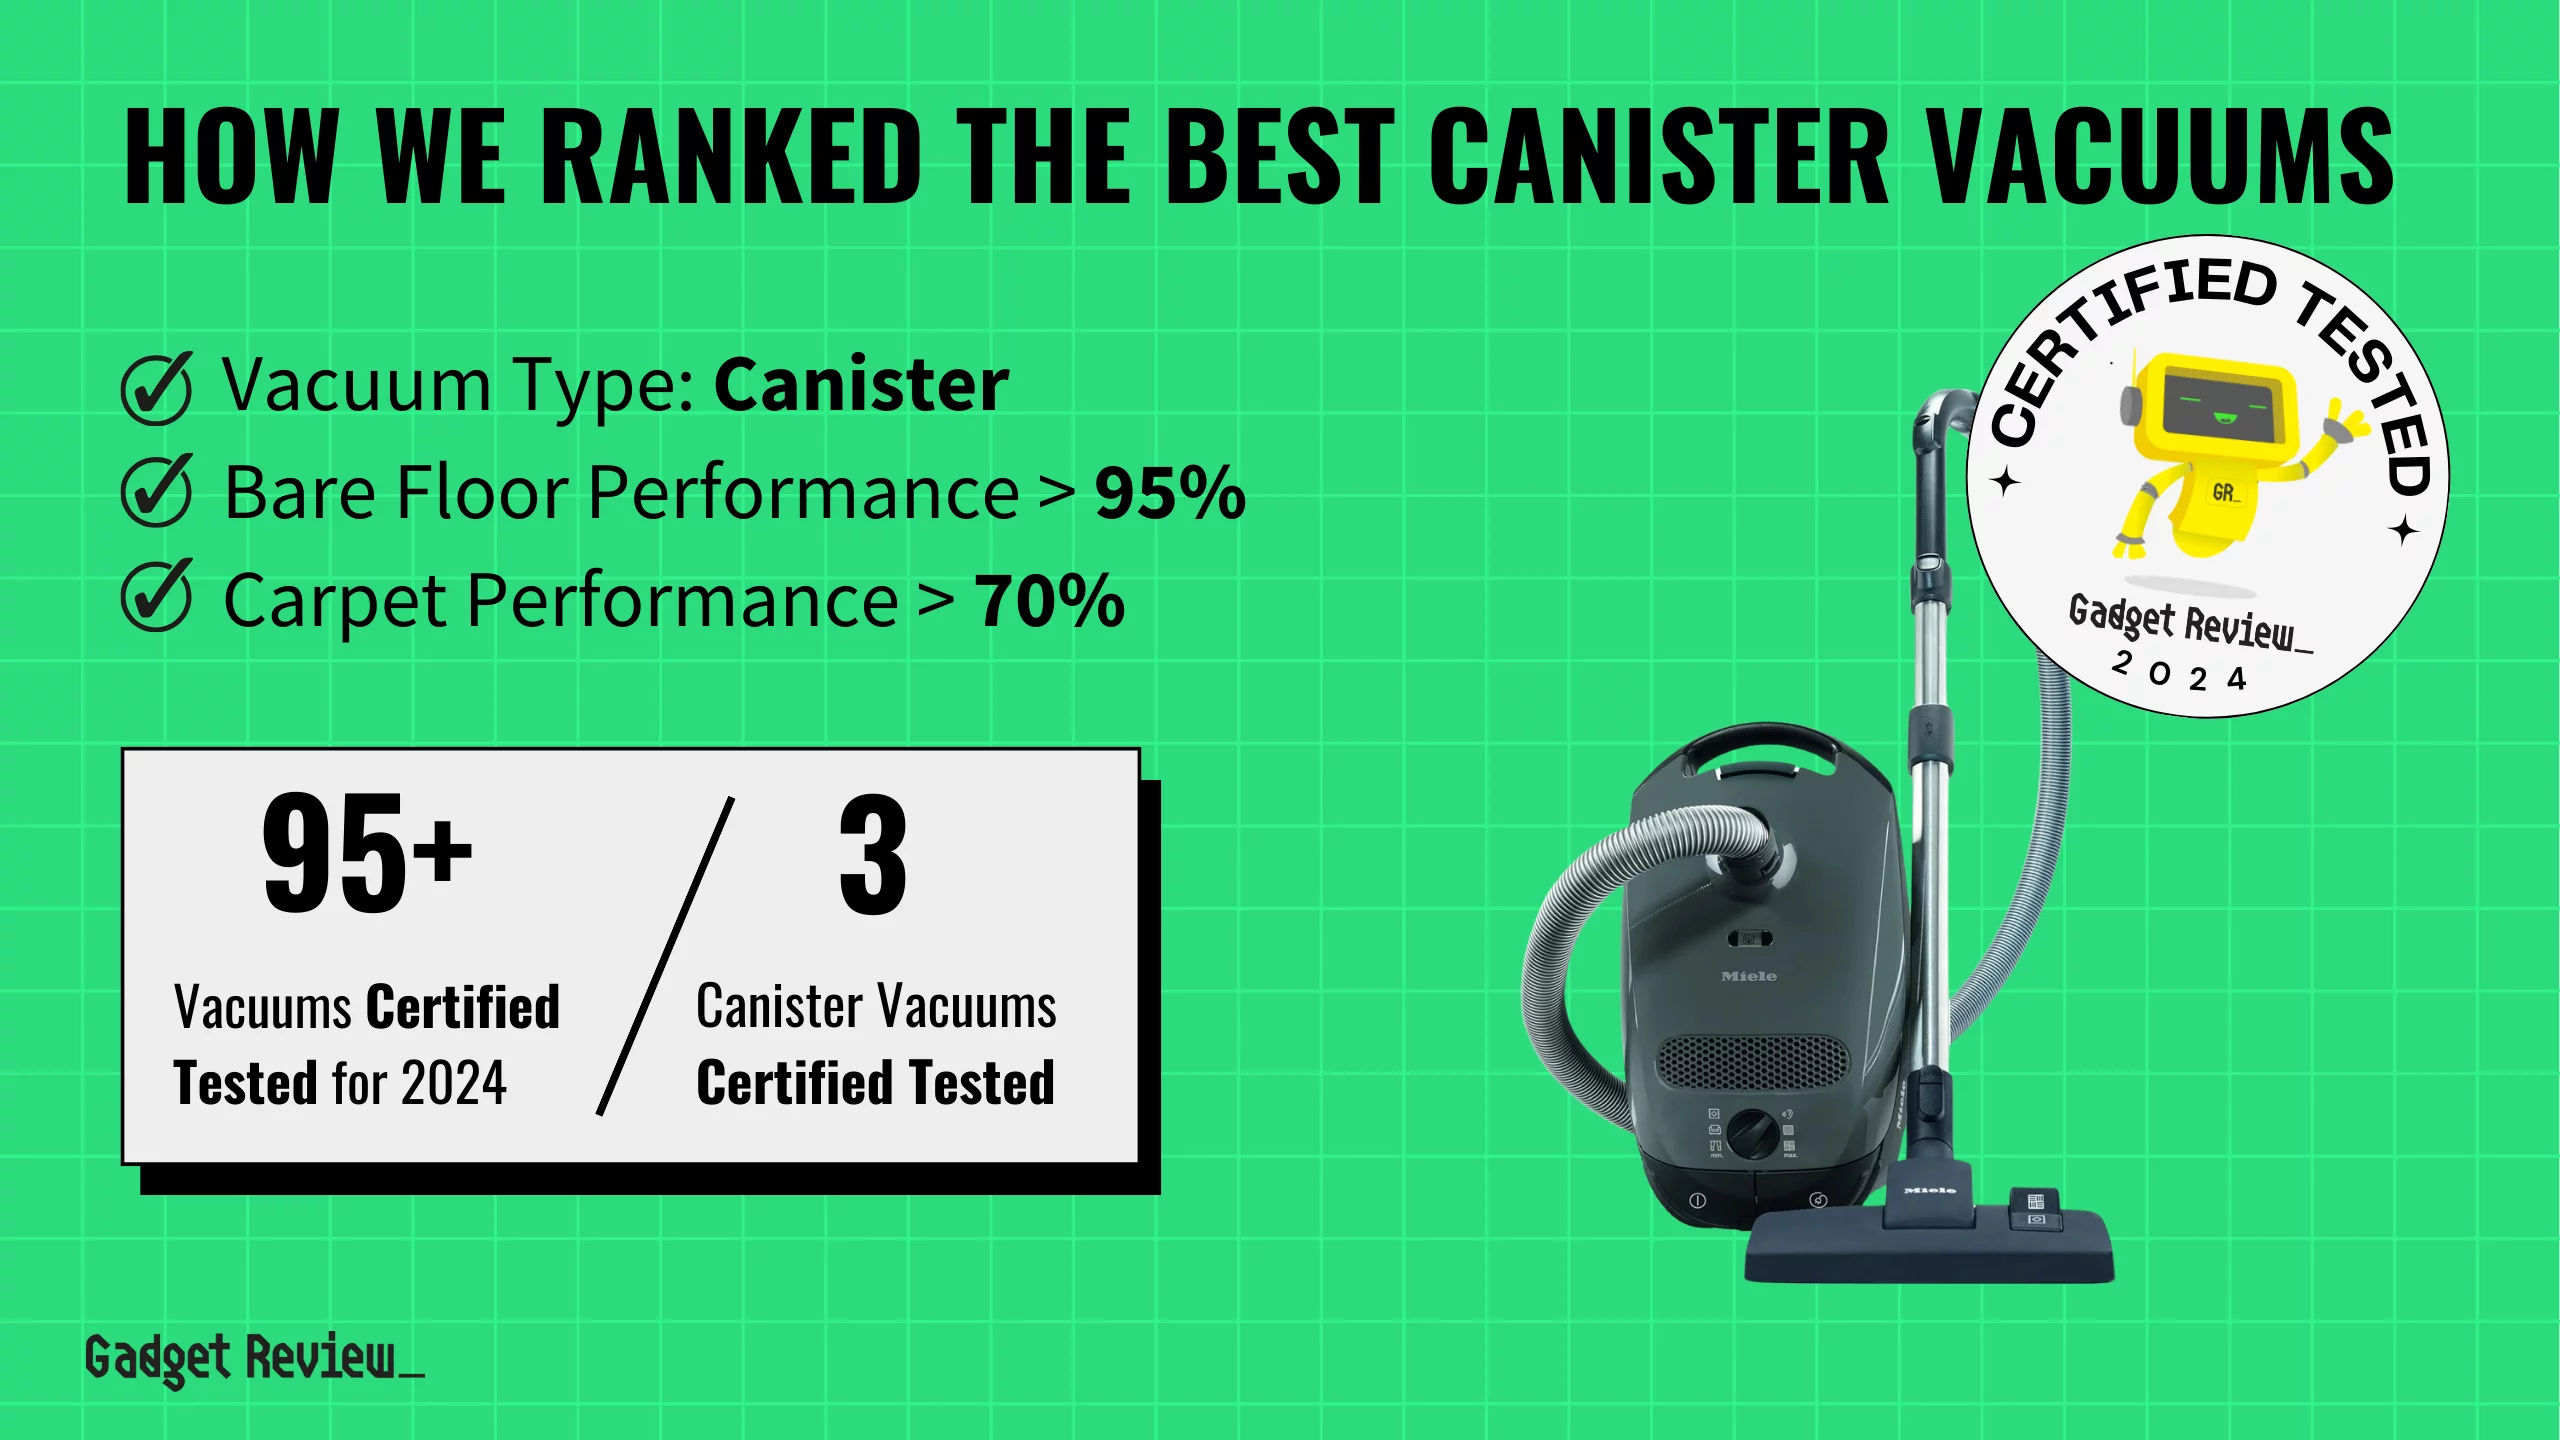 What’s the Best Canister Vacuum? 3 Options Ranked